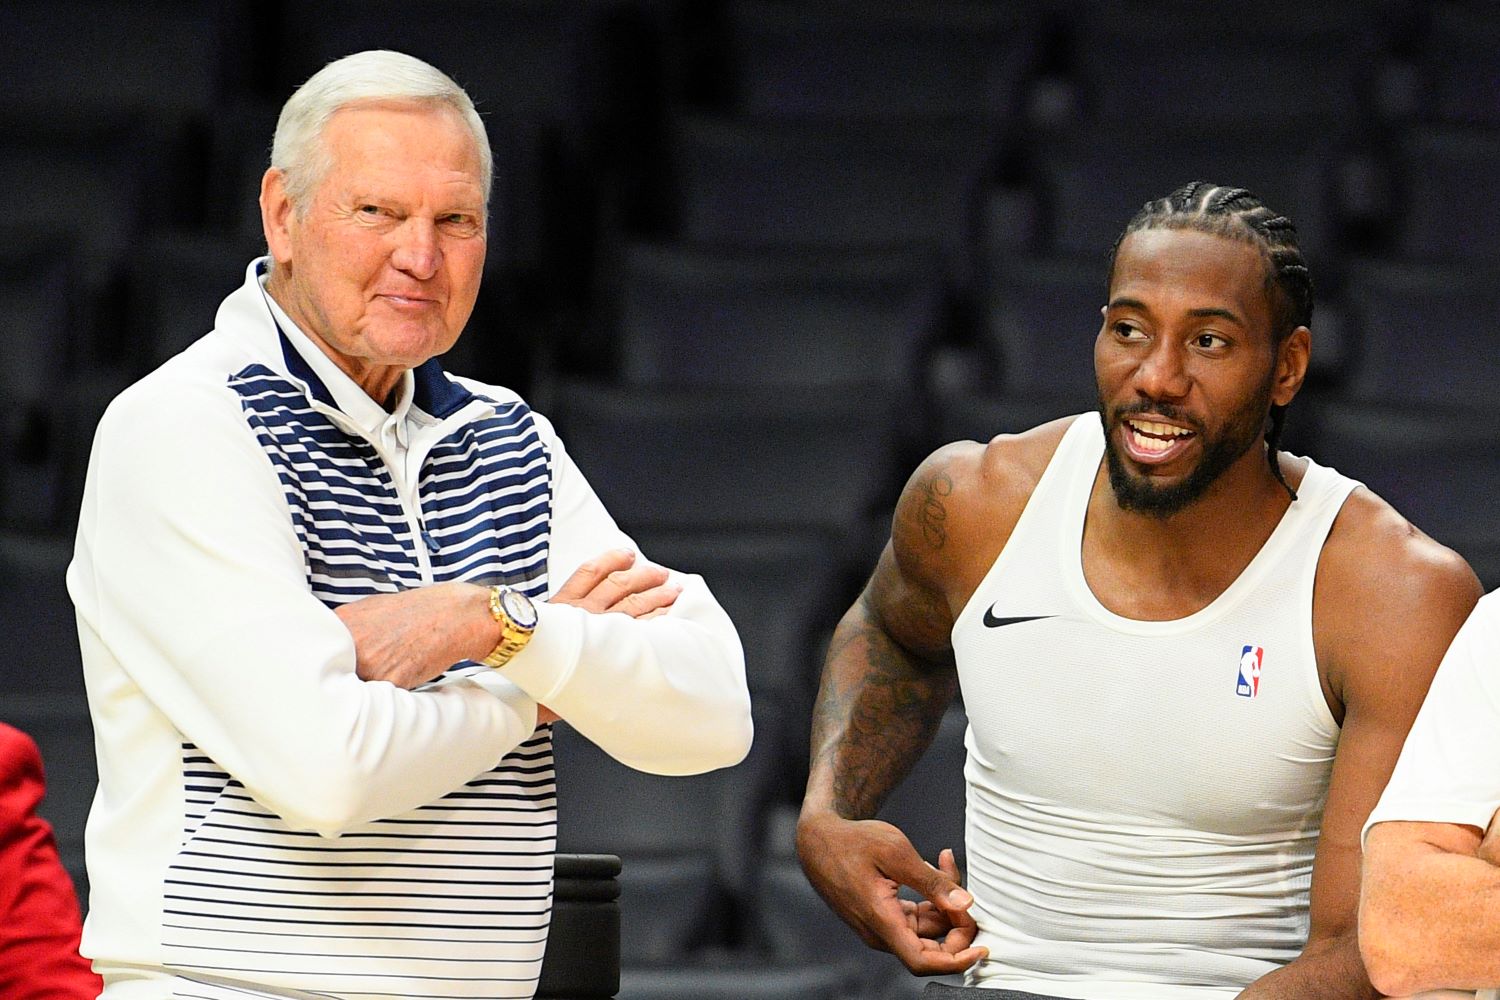 Jerry West faces a $2.5 million lawsuit from a man who claims to have helped bring Kawhi Leonard to the LA Clippers.